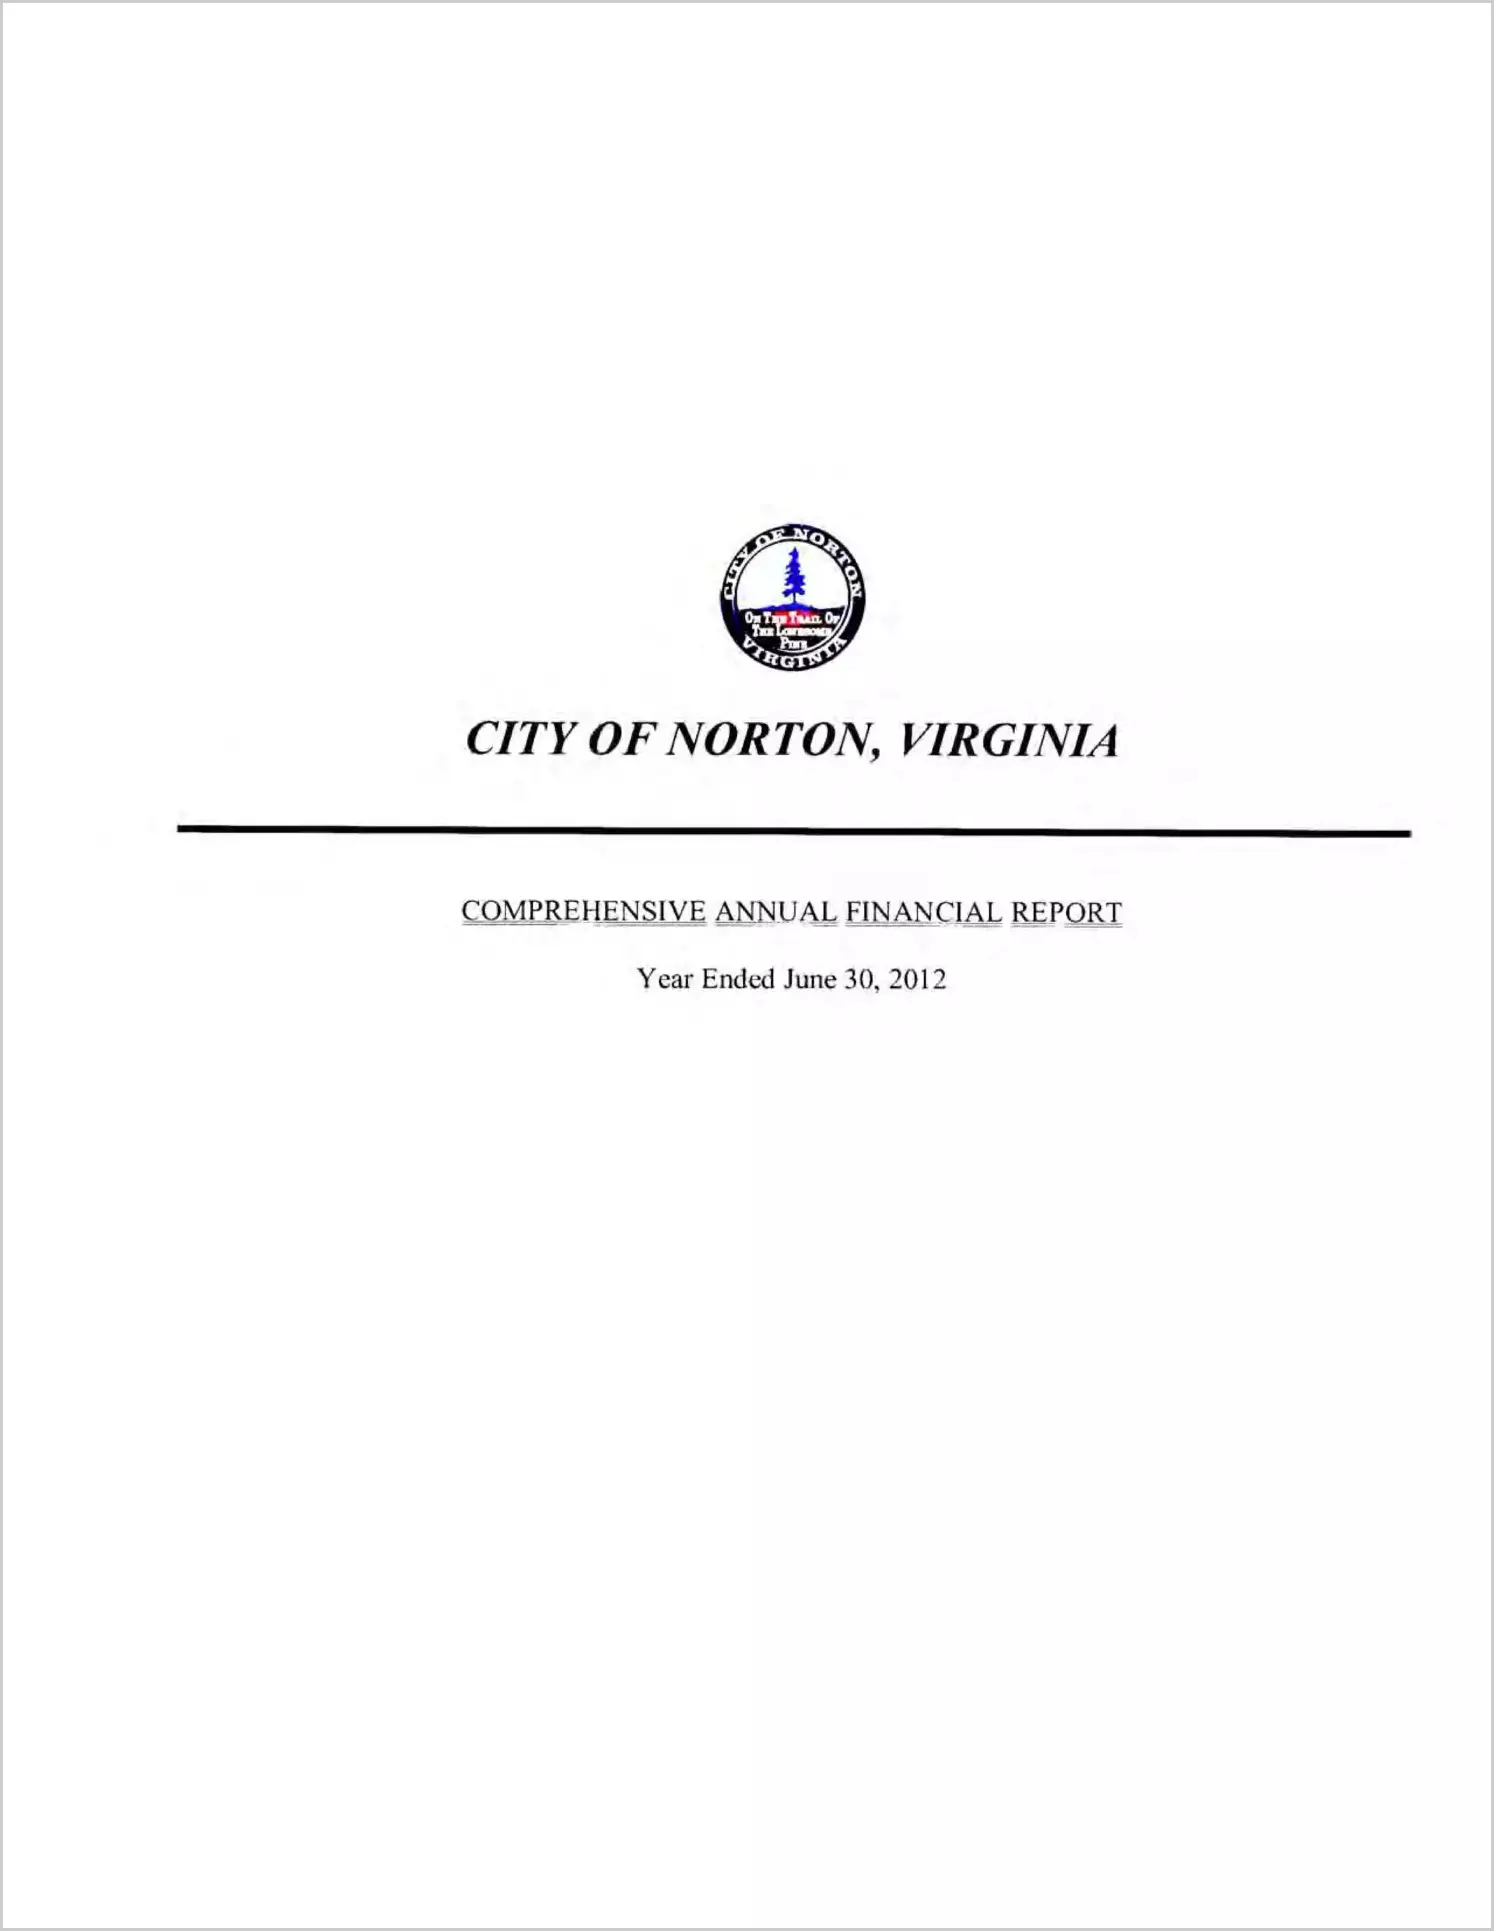 2012 Annual Financial Report for City of Norton